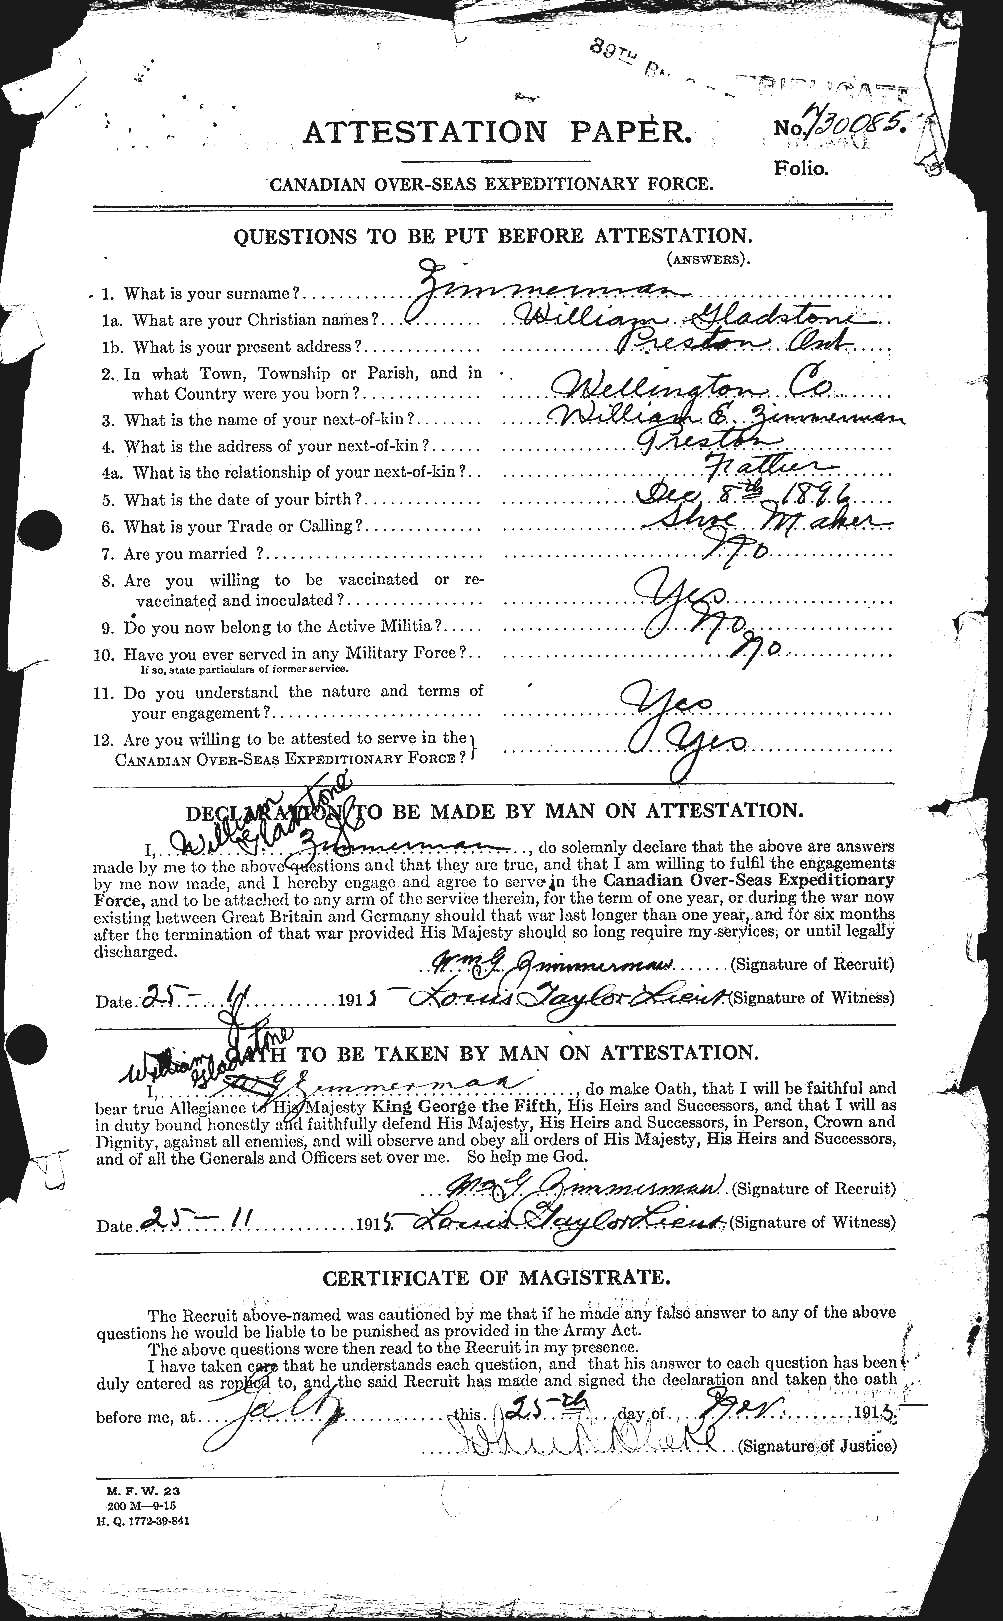 Personnel Records of the First World War - CEF 660270a